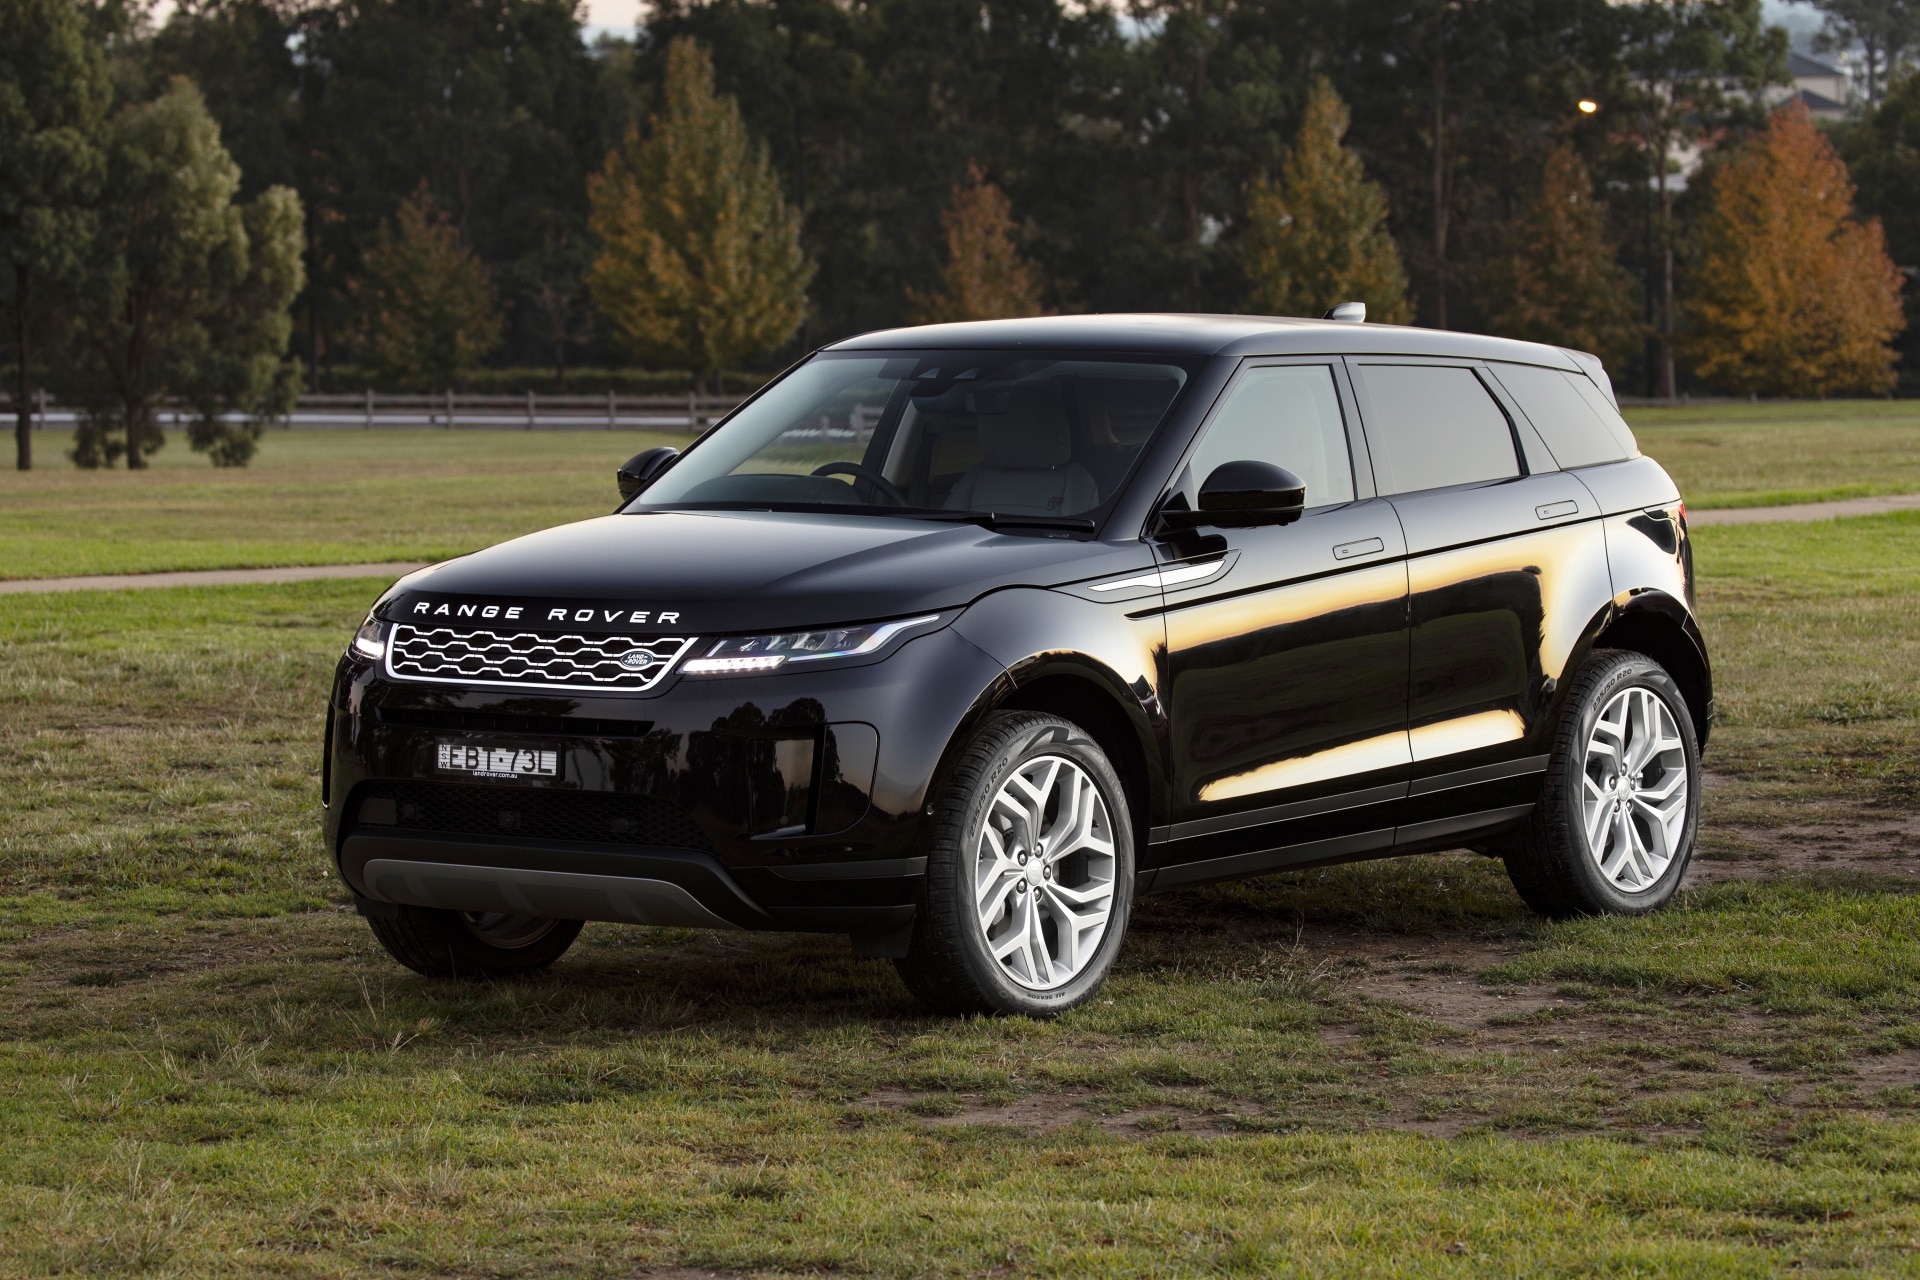 The 2020 Range Rover Evoque Is A Curation Of Class - GQ